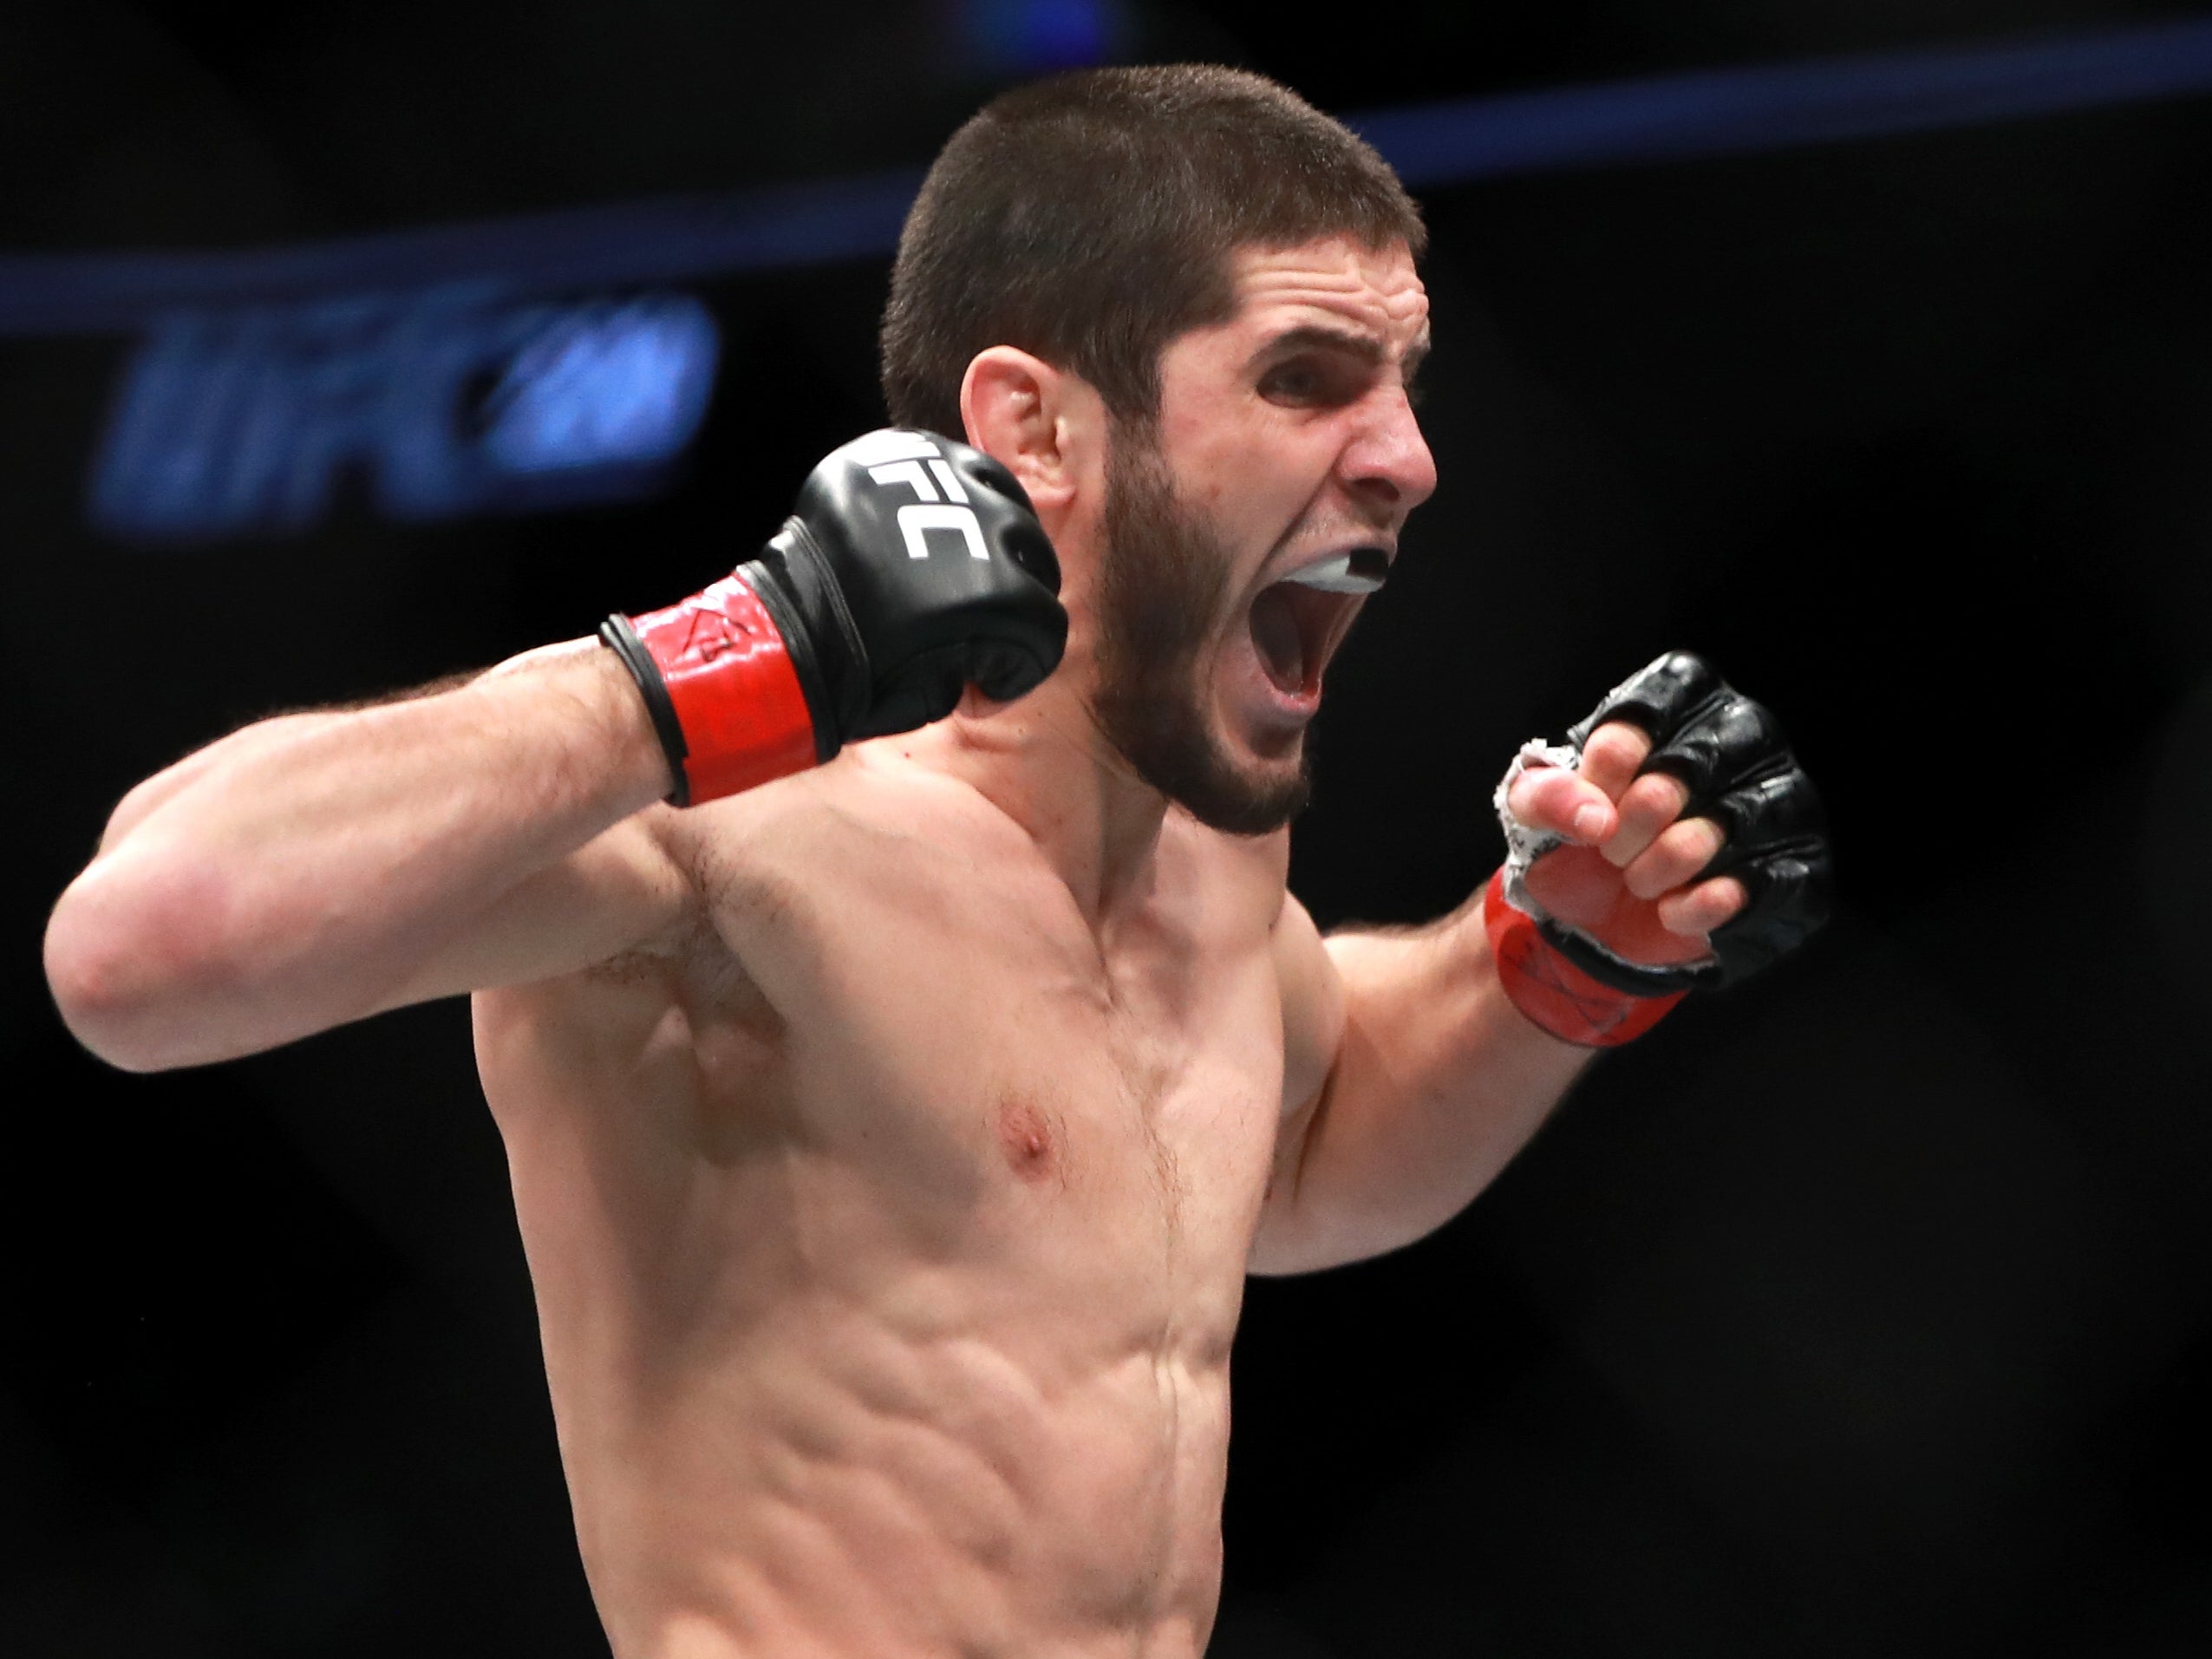 UFC lightweight contender Islam Makhachev has been tipped to take on Charles Oliveira